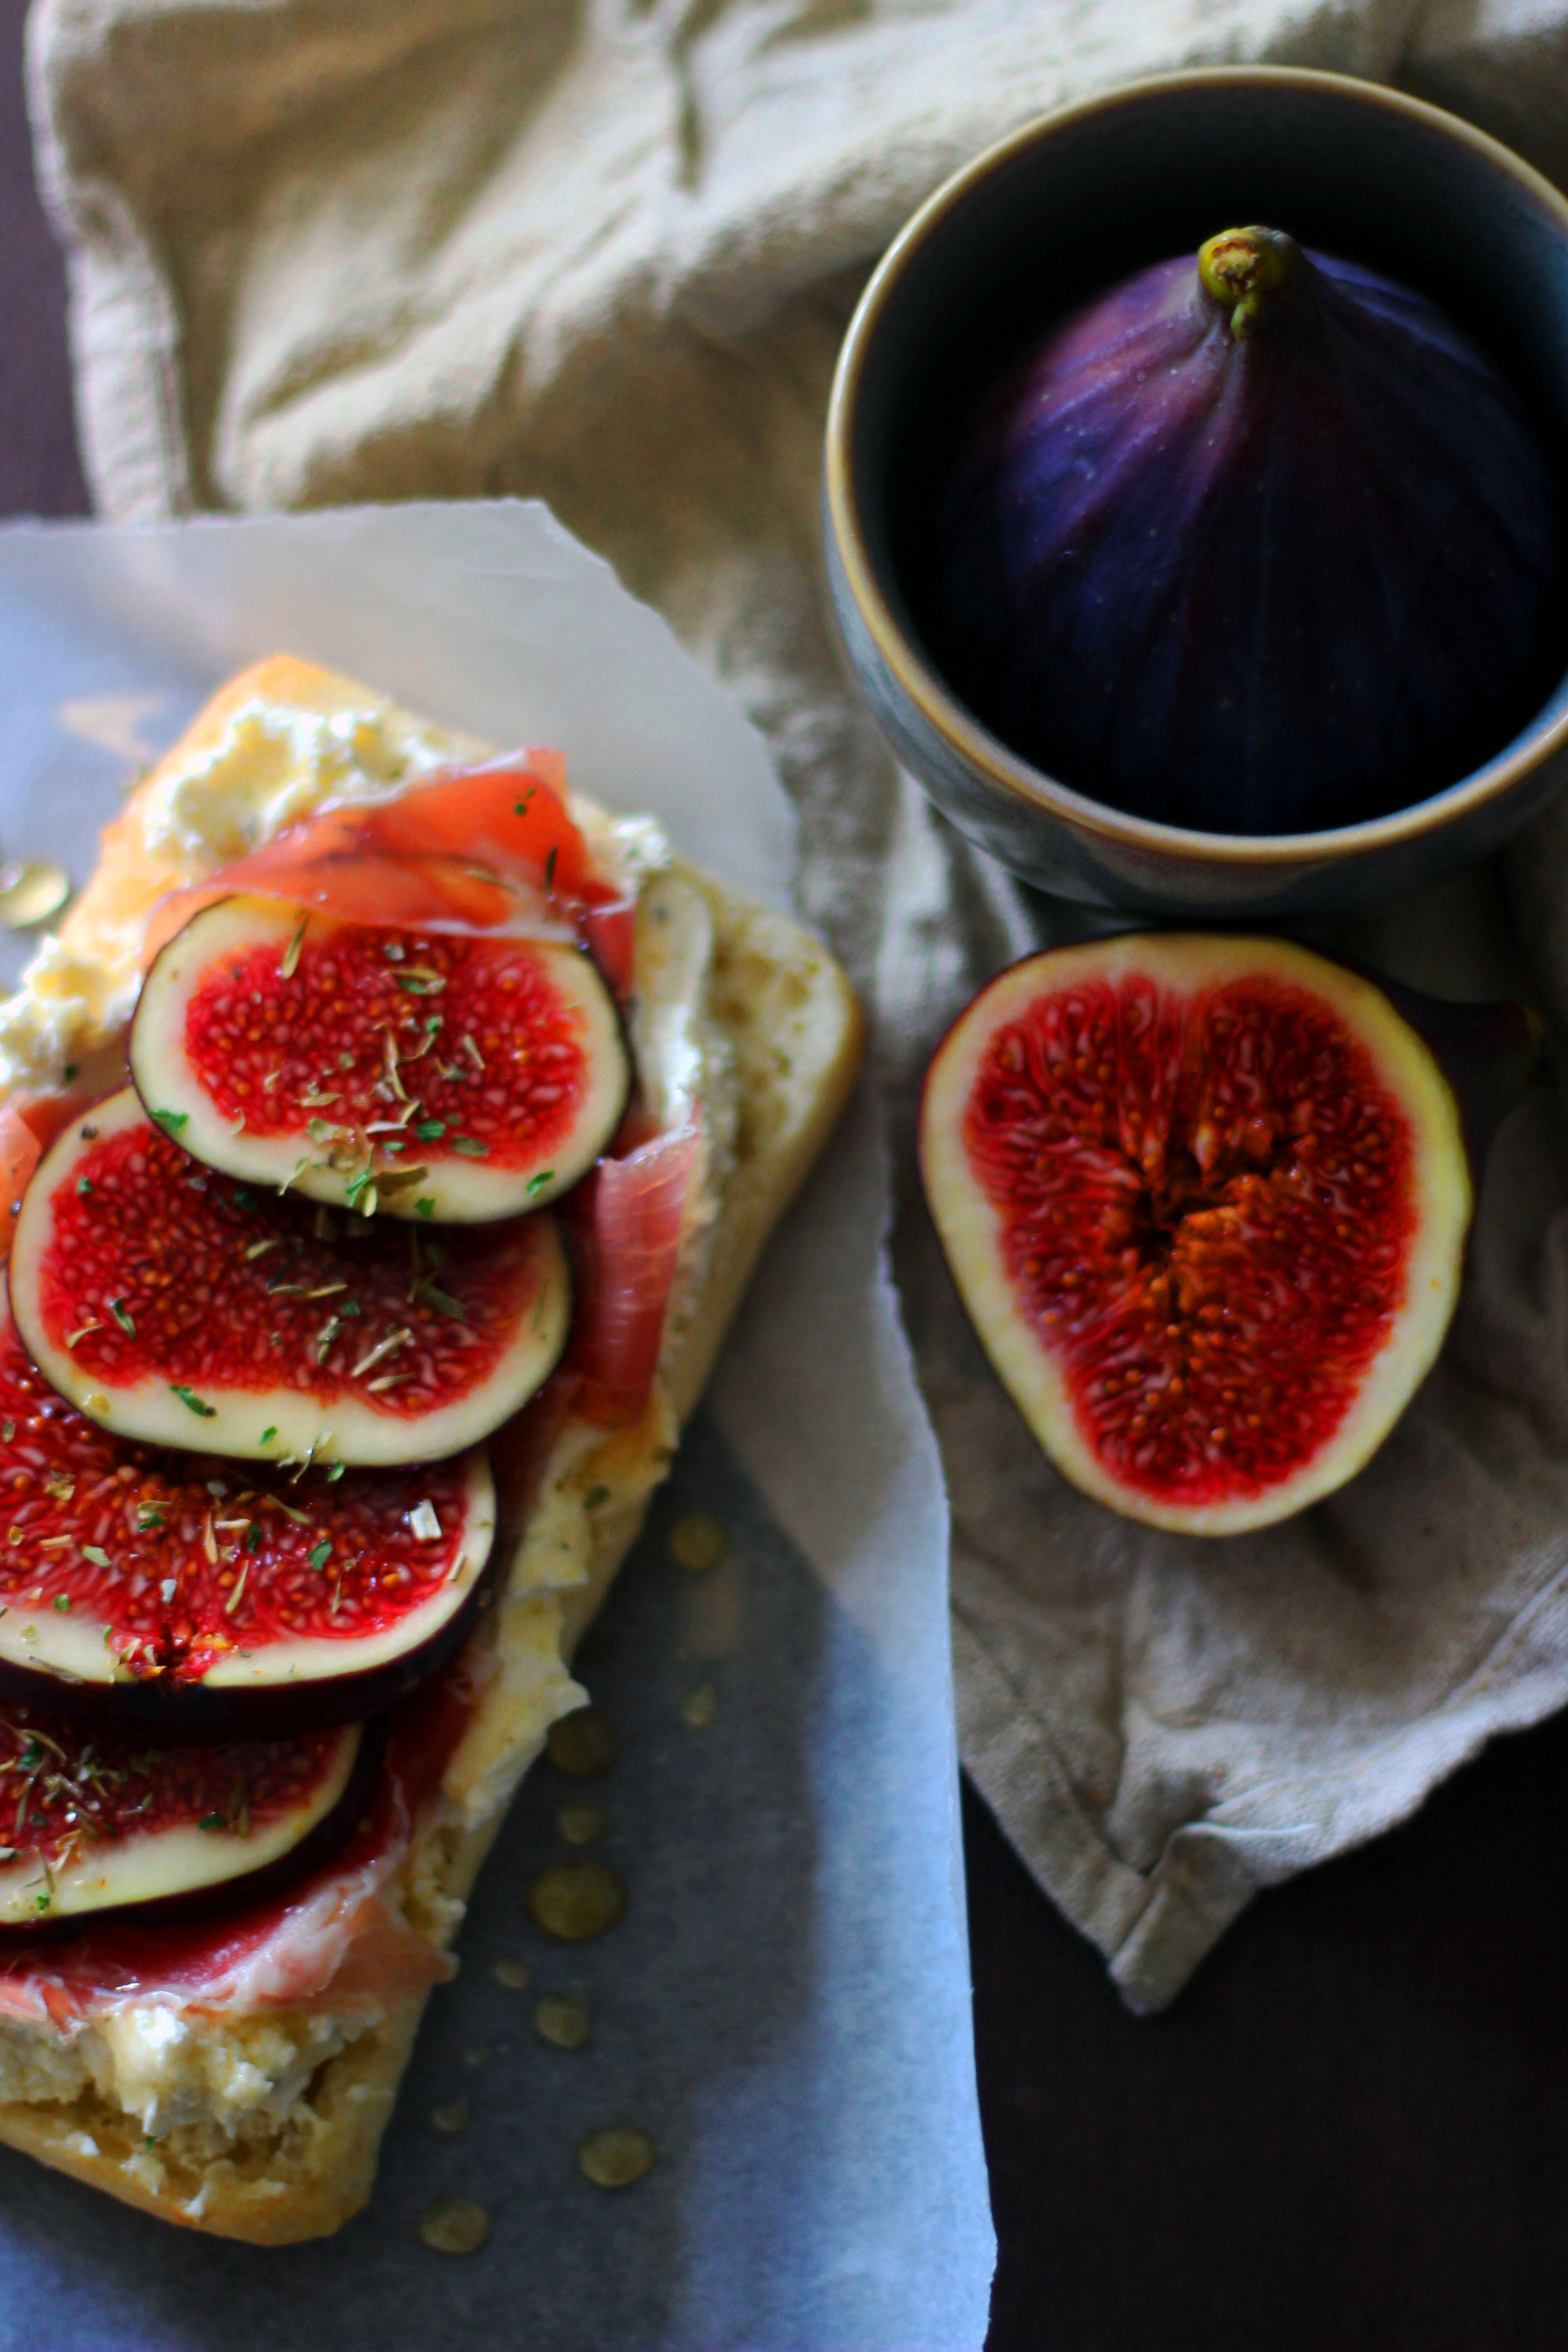 Fig and Prosciutto Sandwiches with Whipped Cheese and Honey